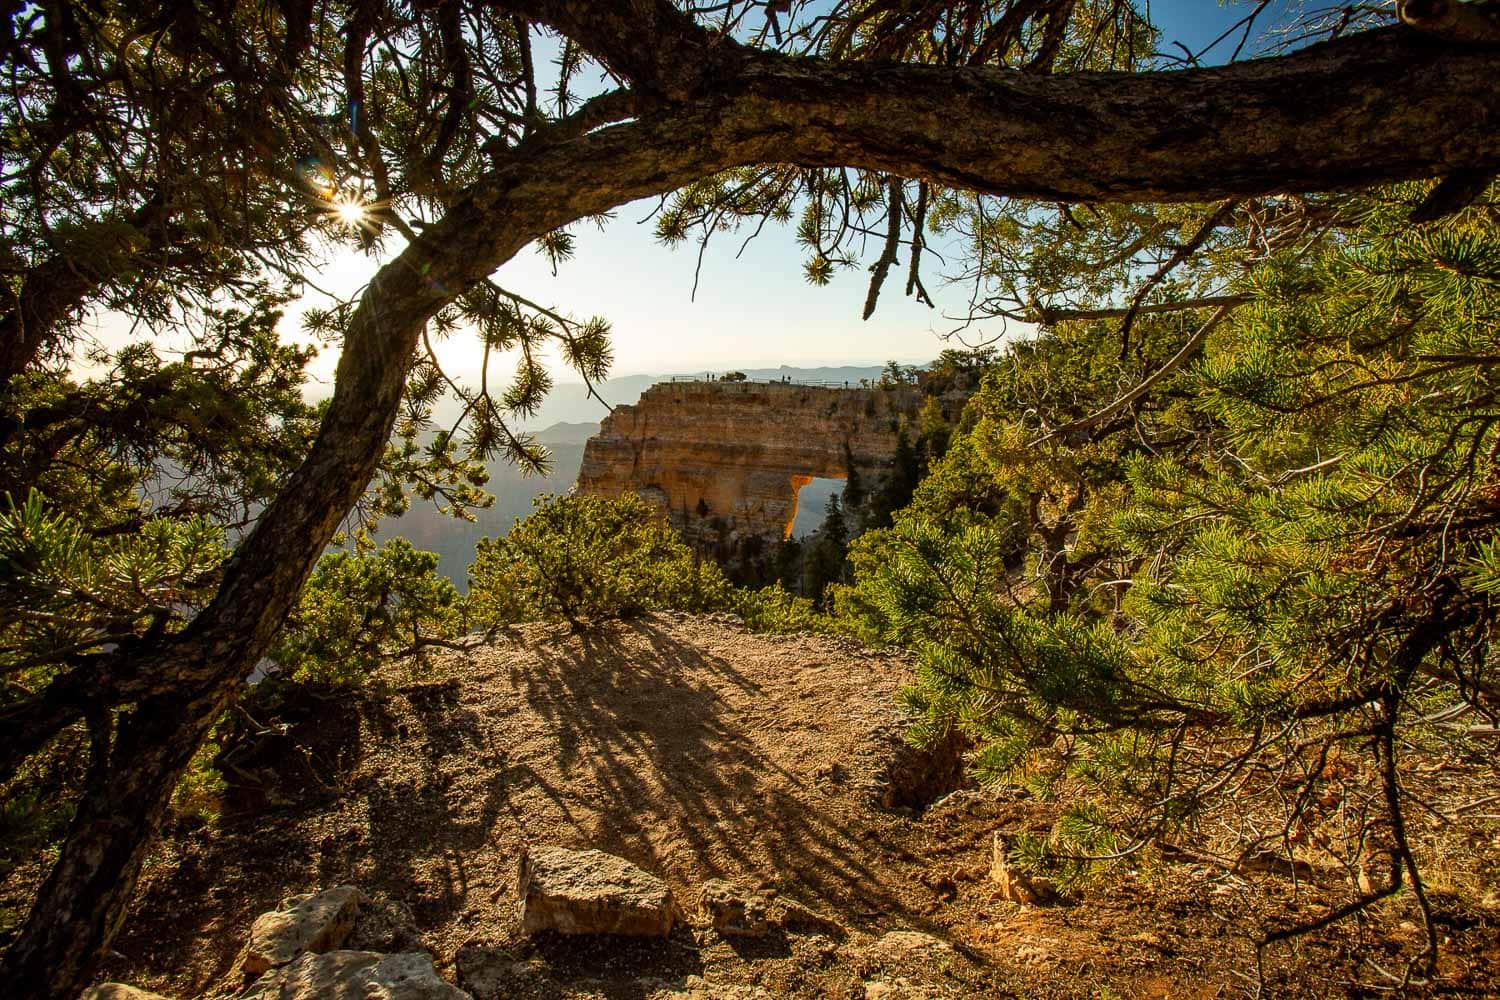 The natural arch on the north rim of the grand canyon framed by trees.